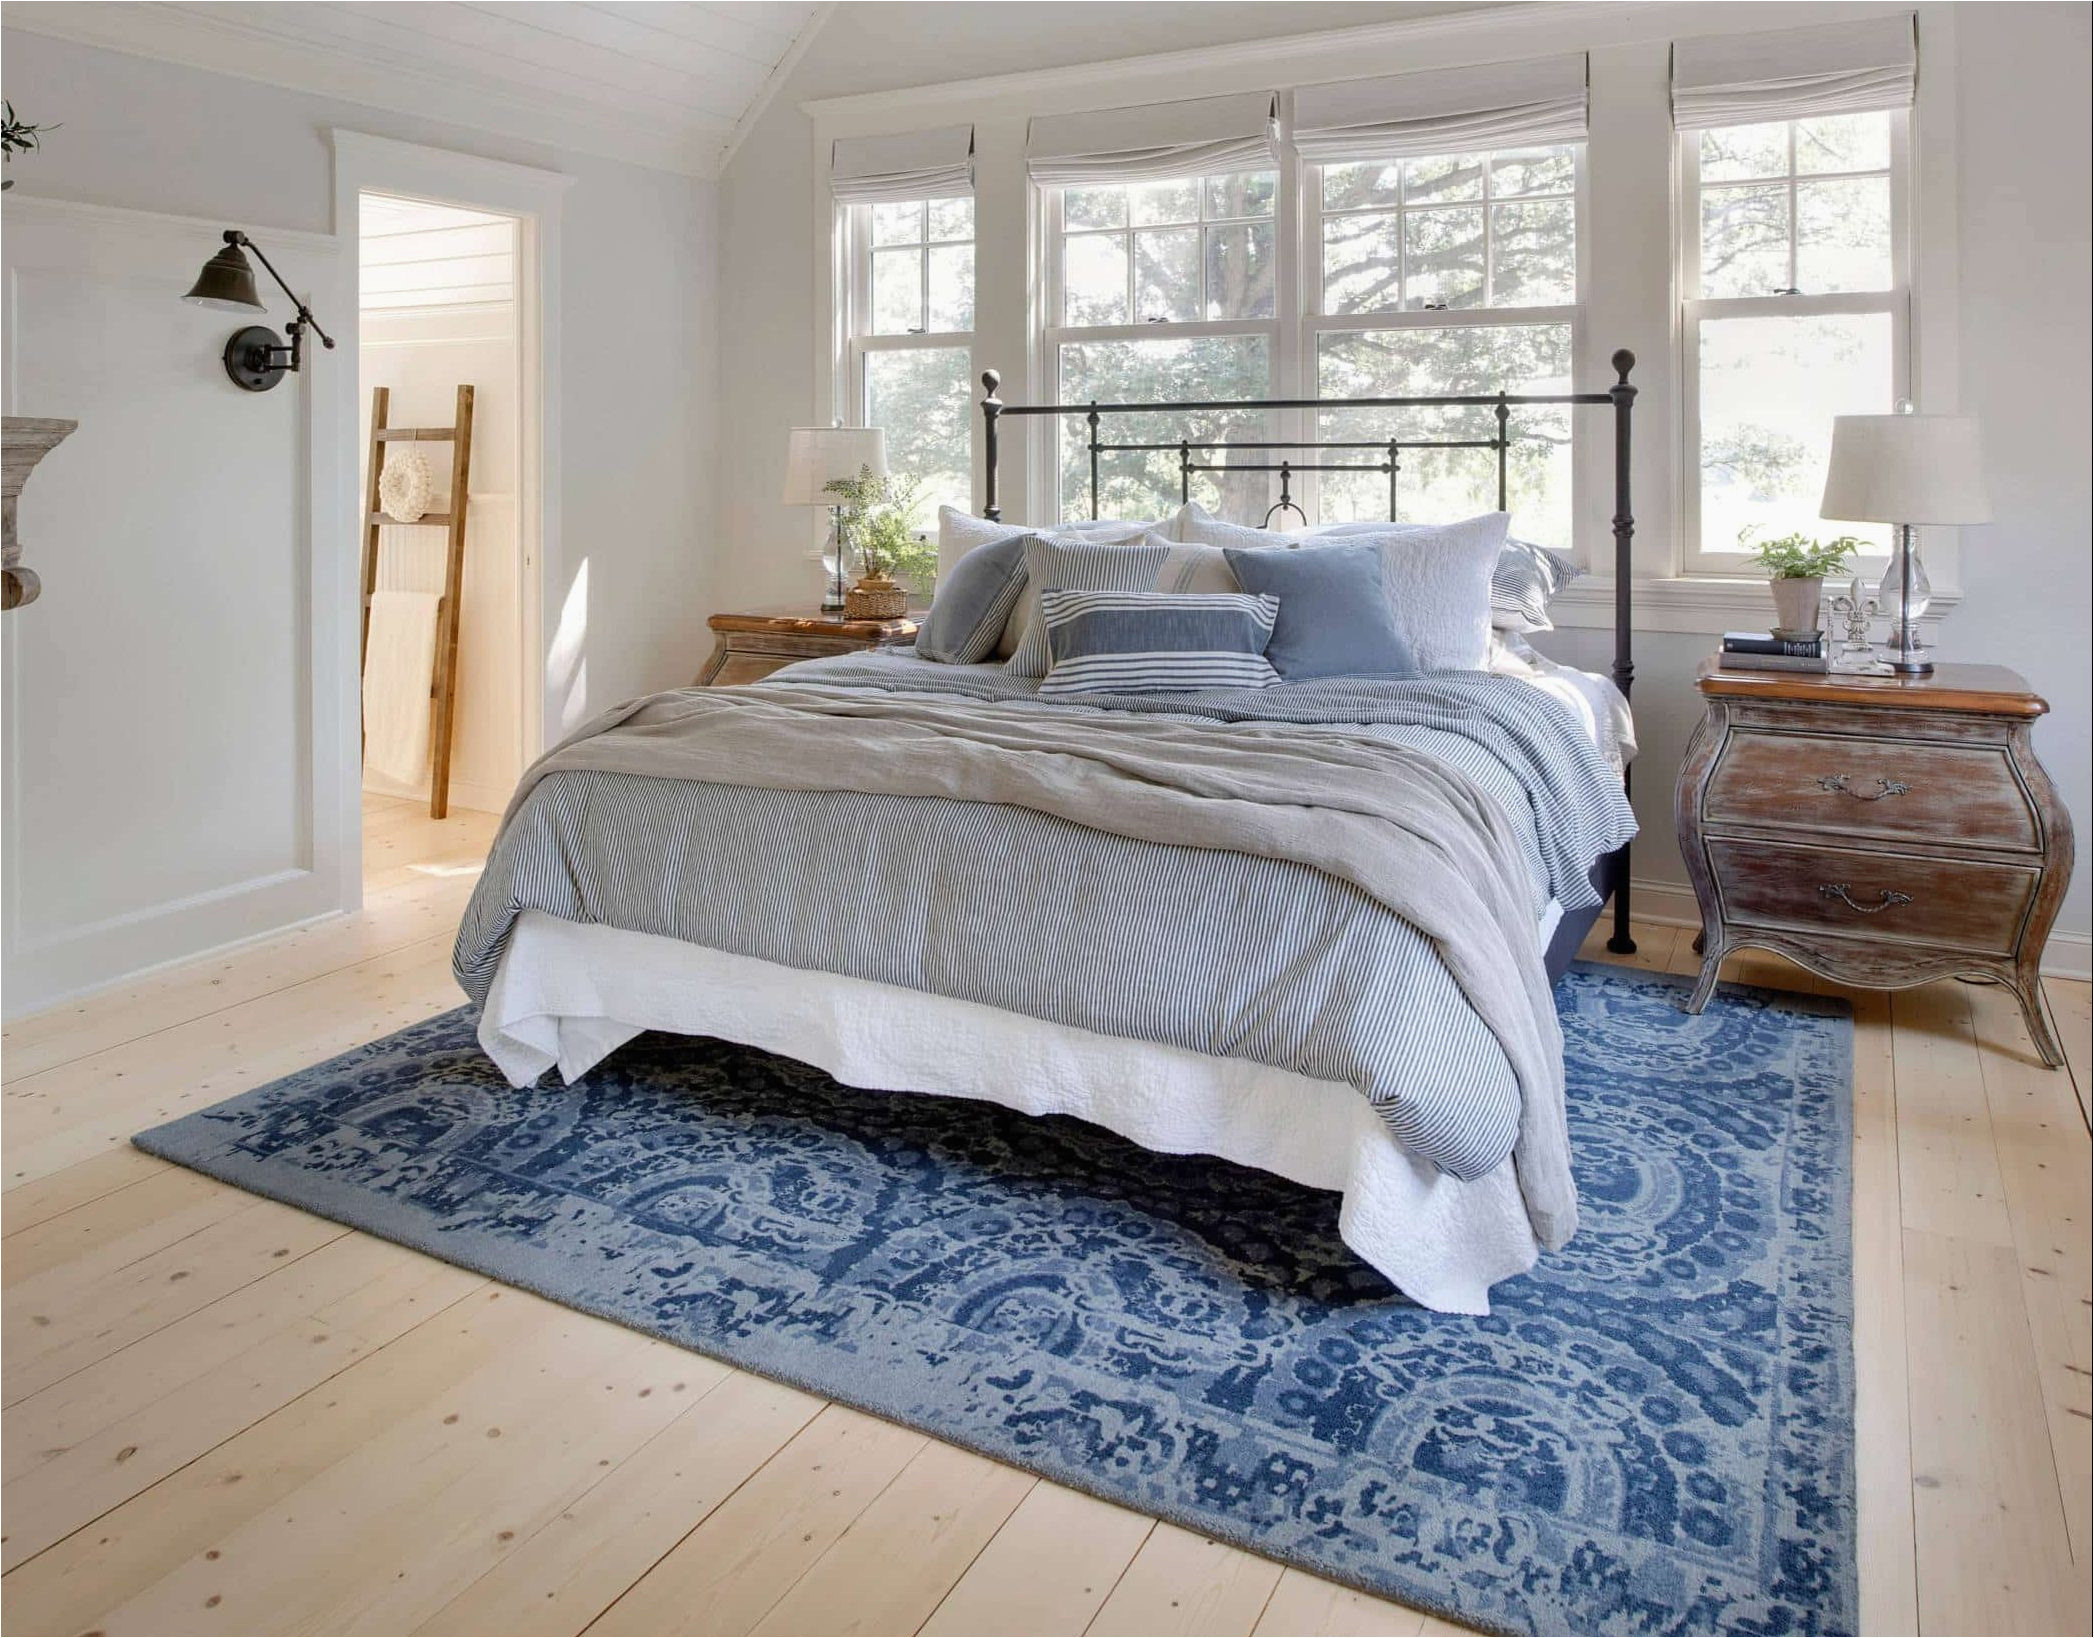 King Size Bed area Rug What Size Rug Do You Put Under A King Size Bed? – Decor Snob